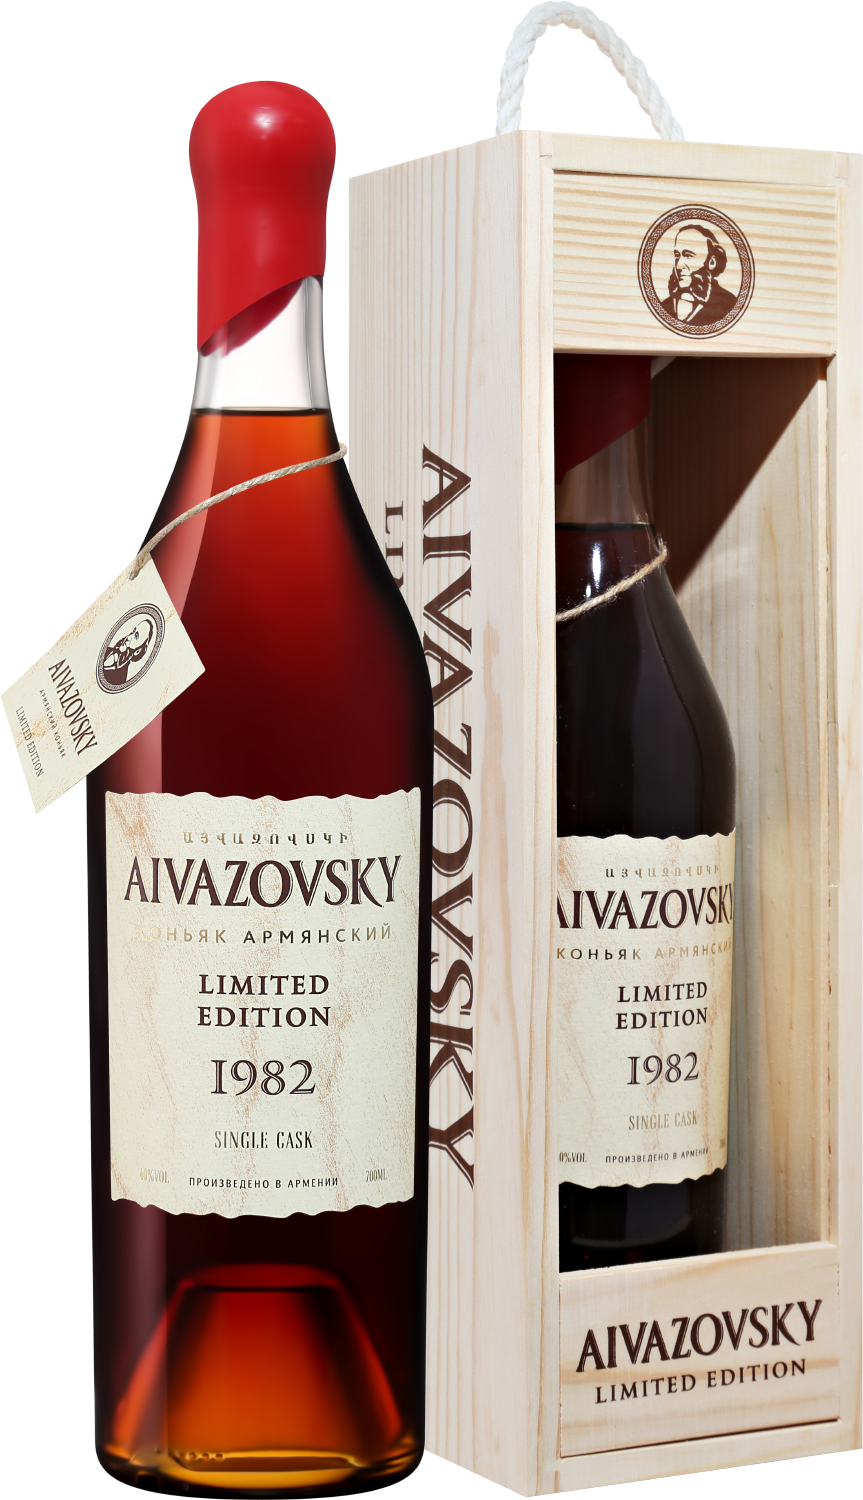 Aivazovsky Limited Edition 1982 (gift box)